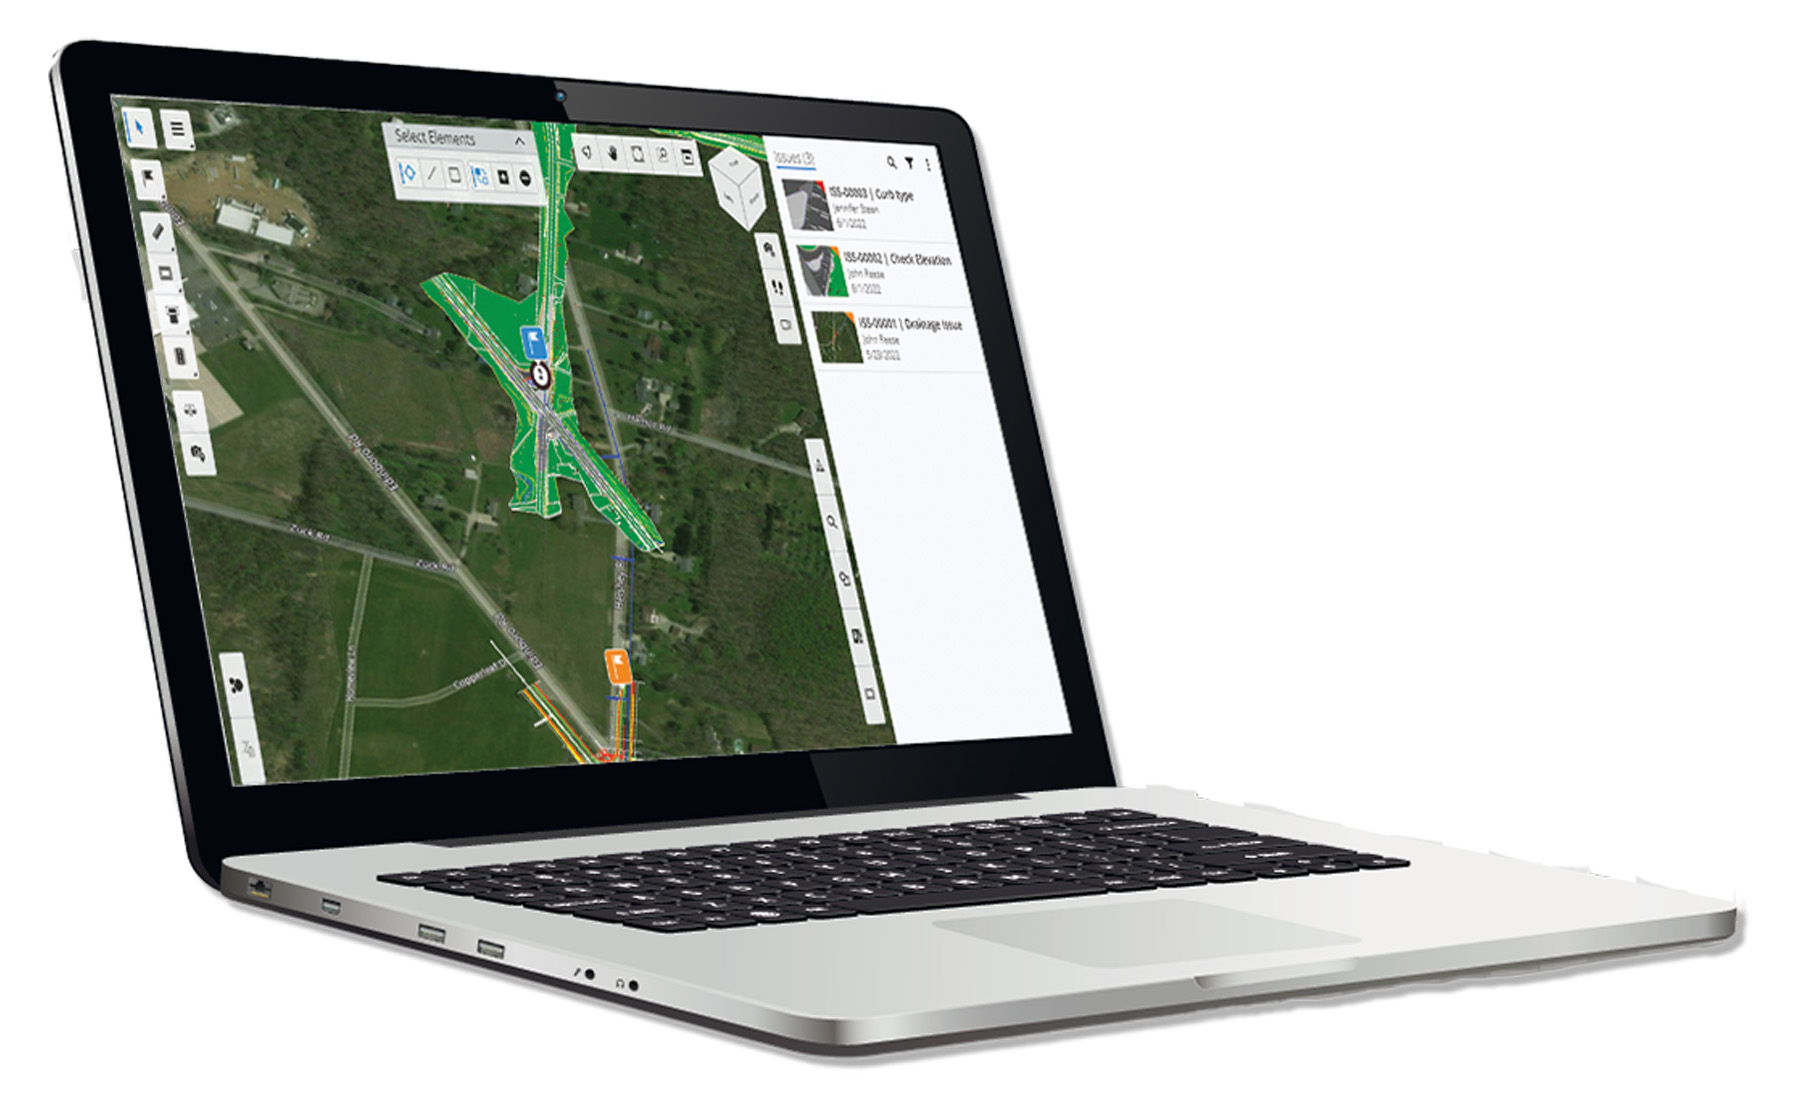 Image on a laptop shows a digital design review with markings for roads.